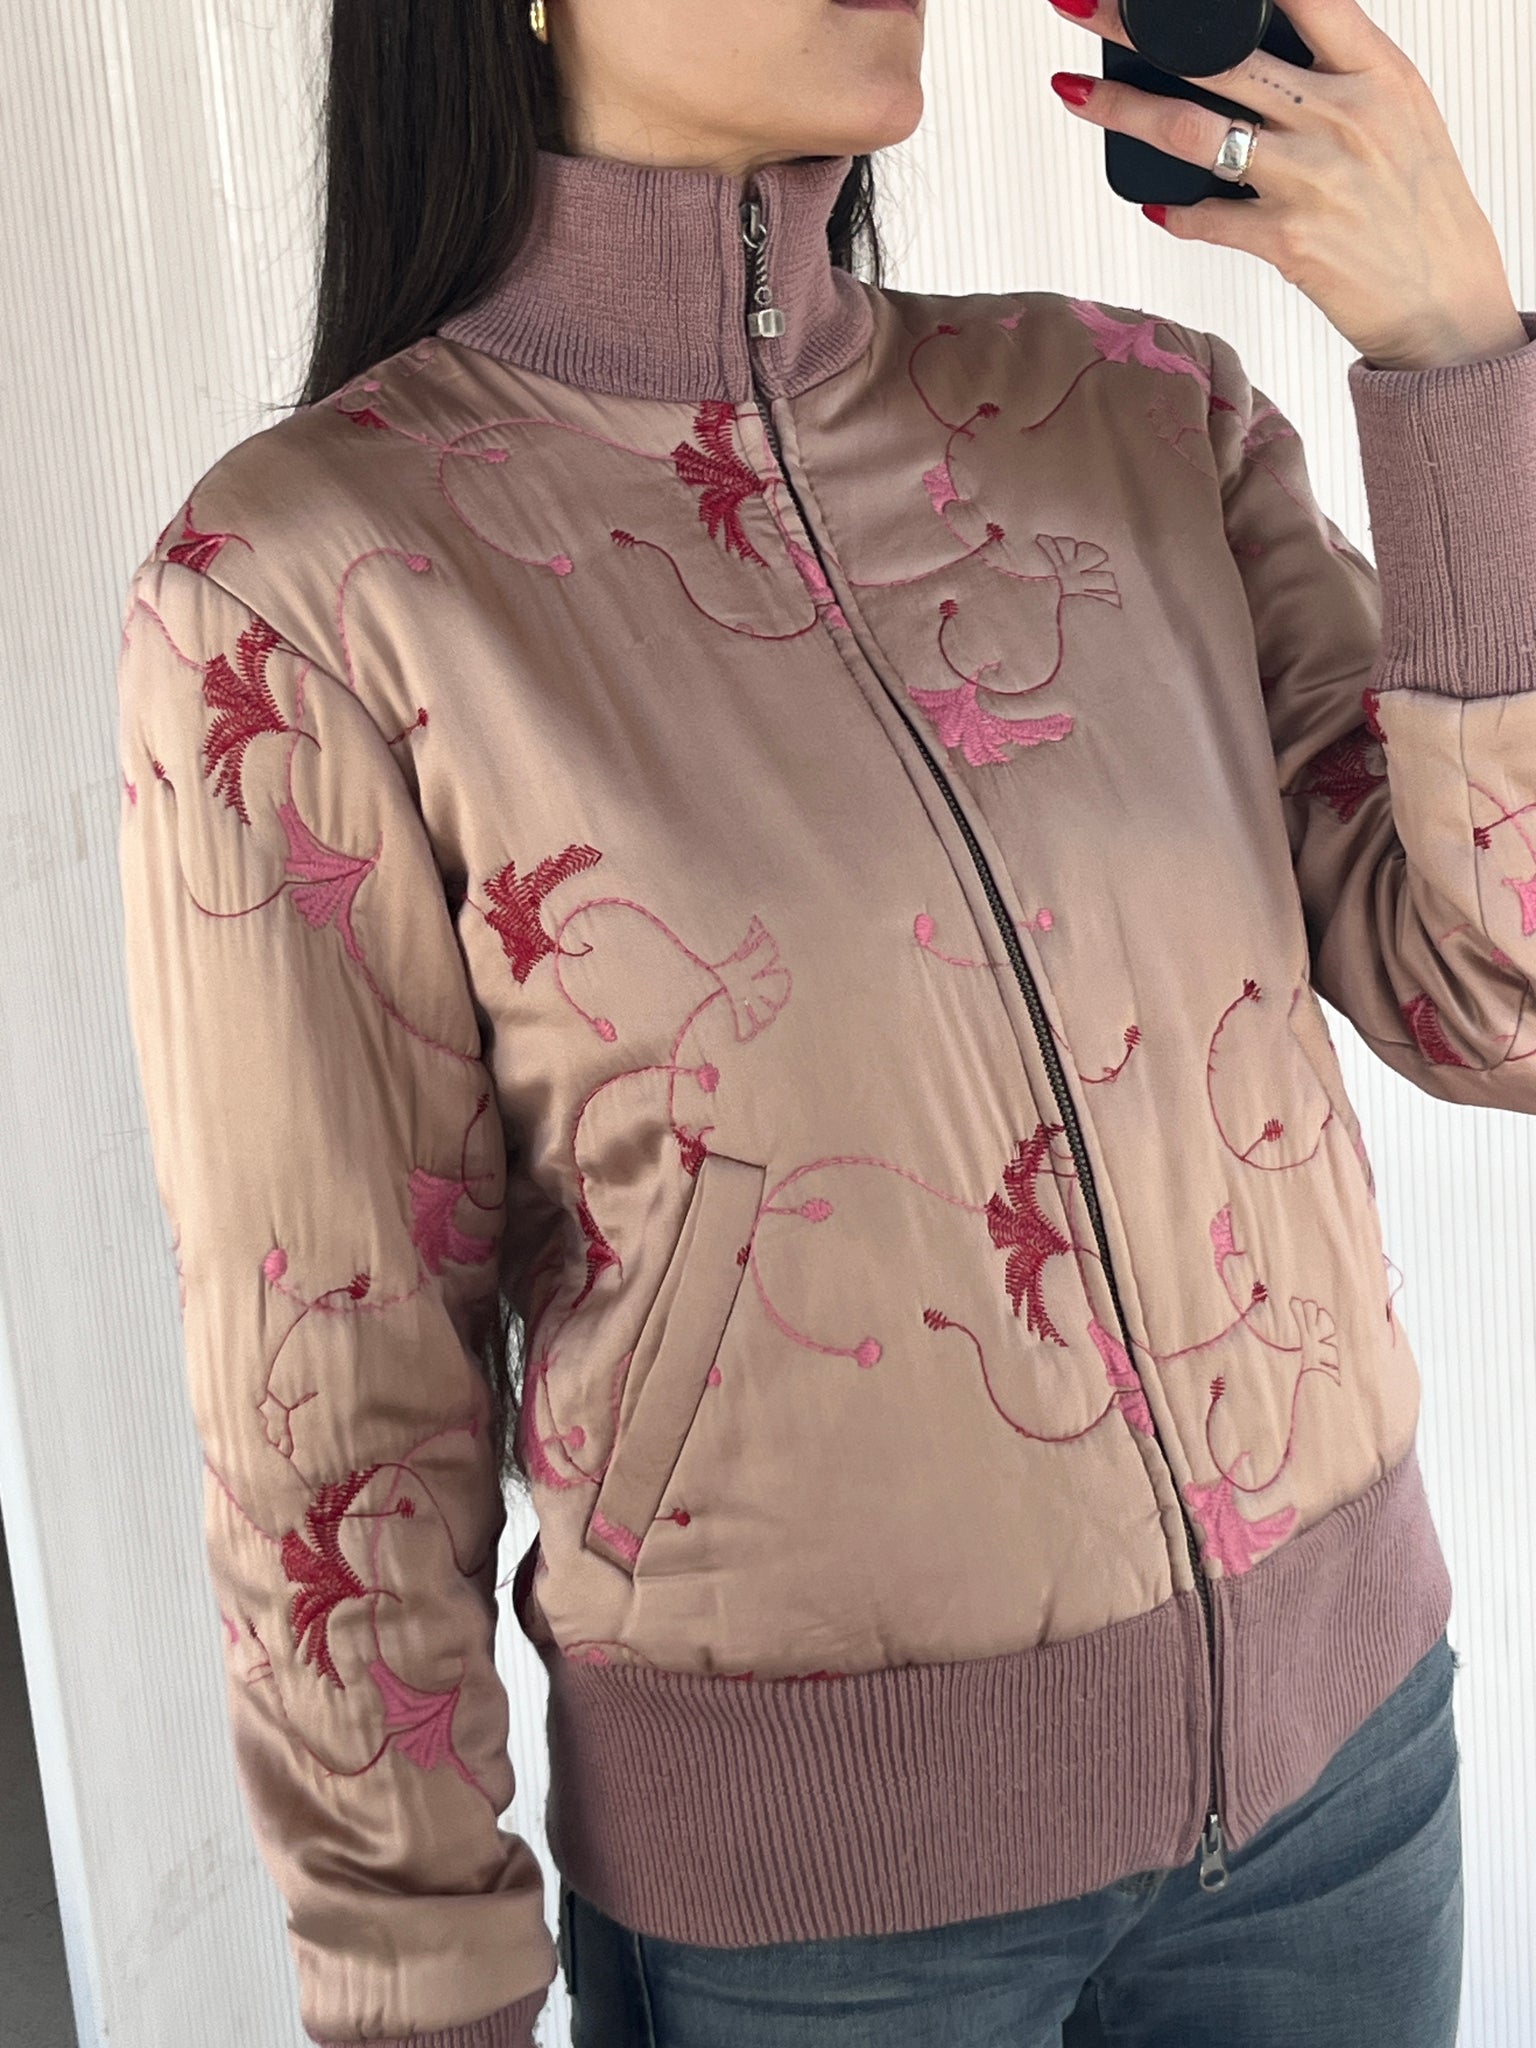 Guess silk embroidered bomber